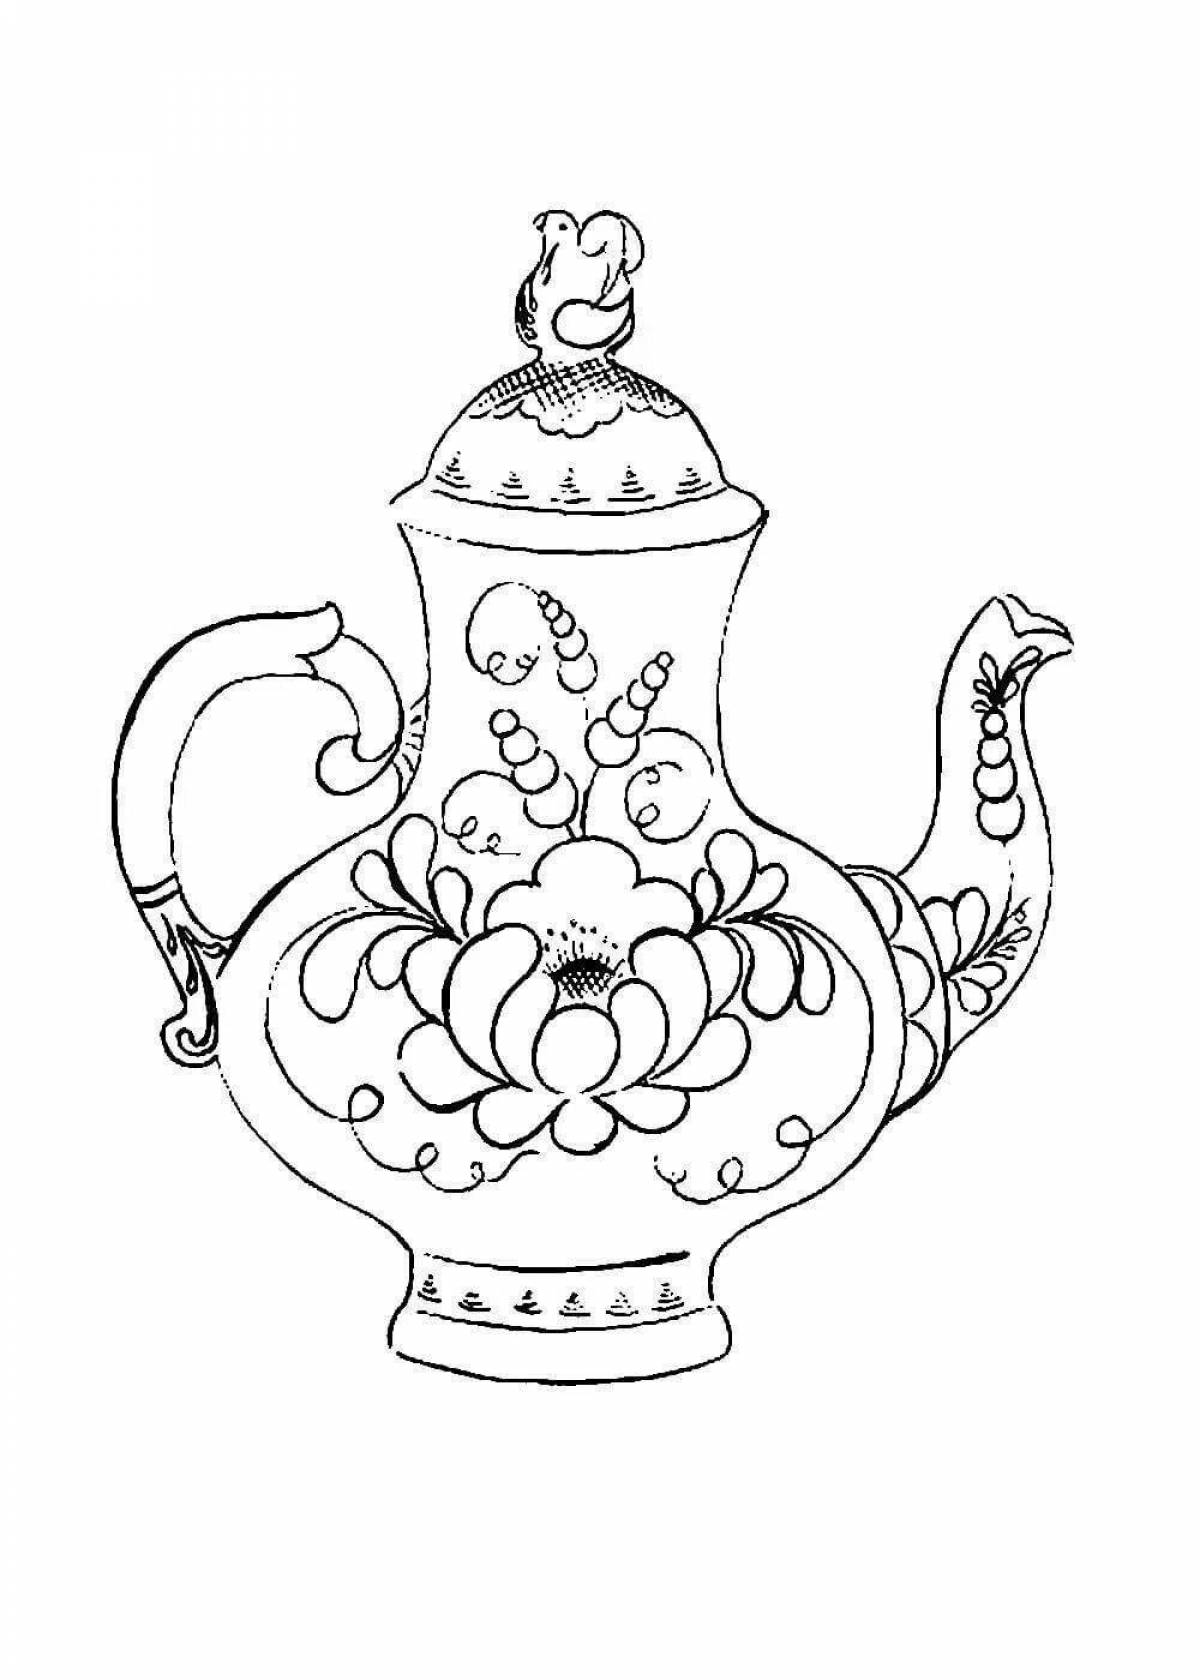 Gzhel plate coloring book with a colorful theme